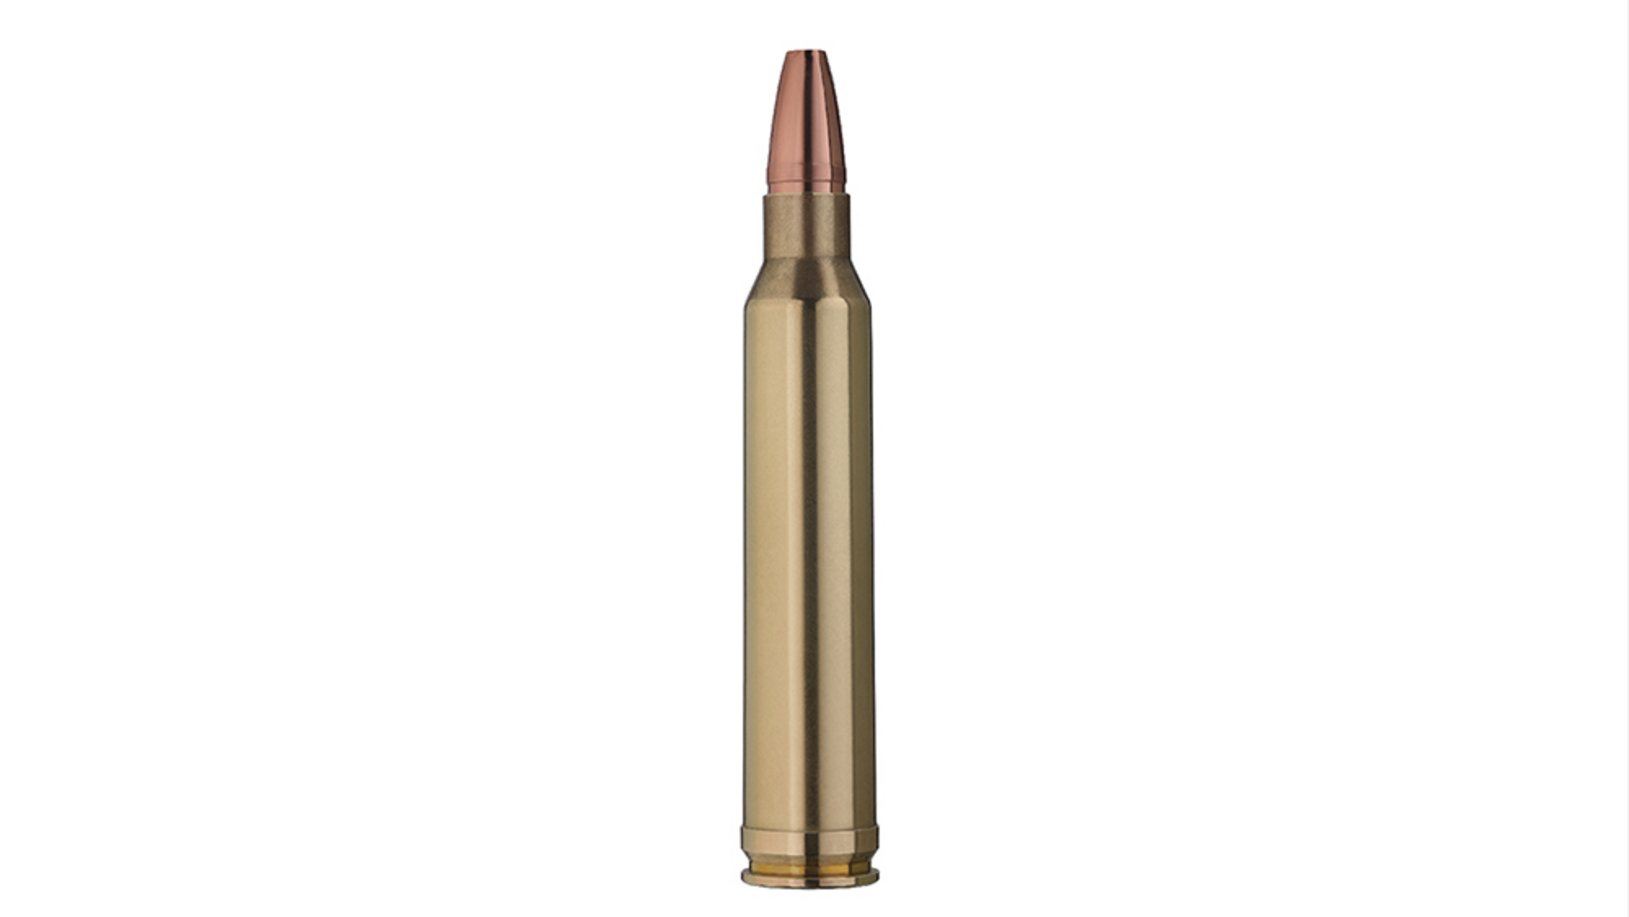 Single bullet view of GECO .300 Win. Mag. STAR 10,7g